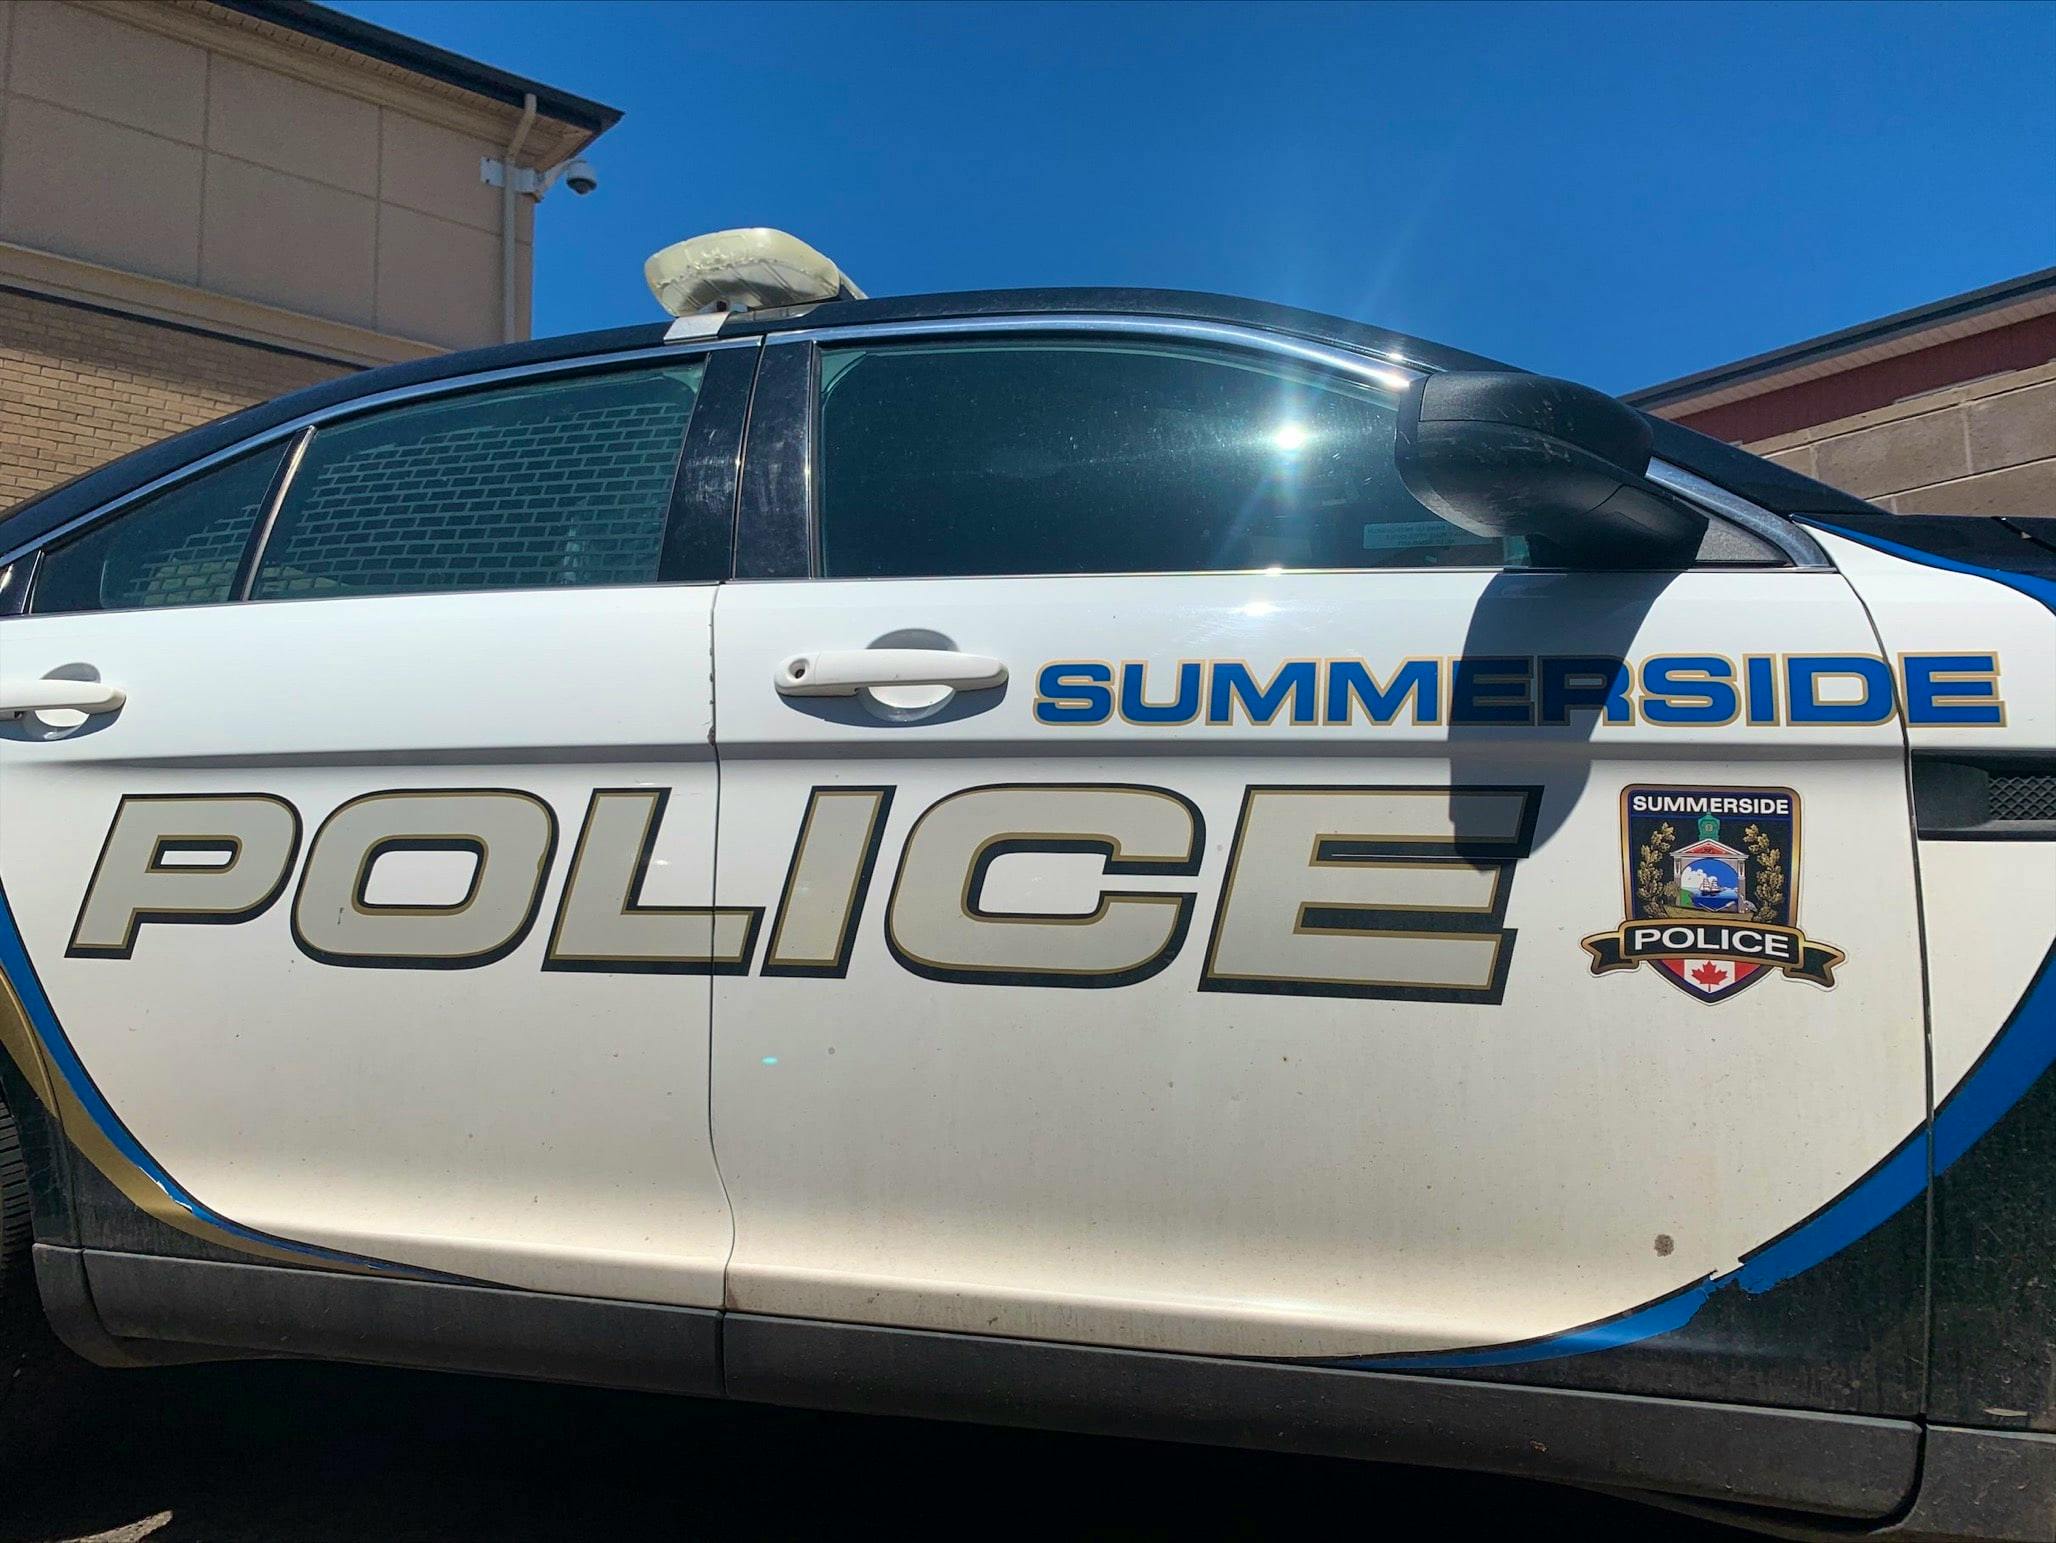 Summerside police said officers responded to the break-in report just after noon Thursday.